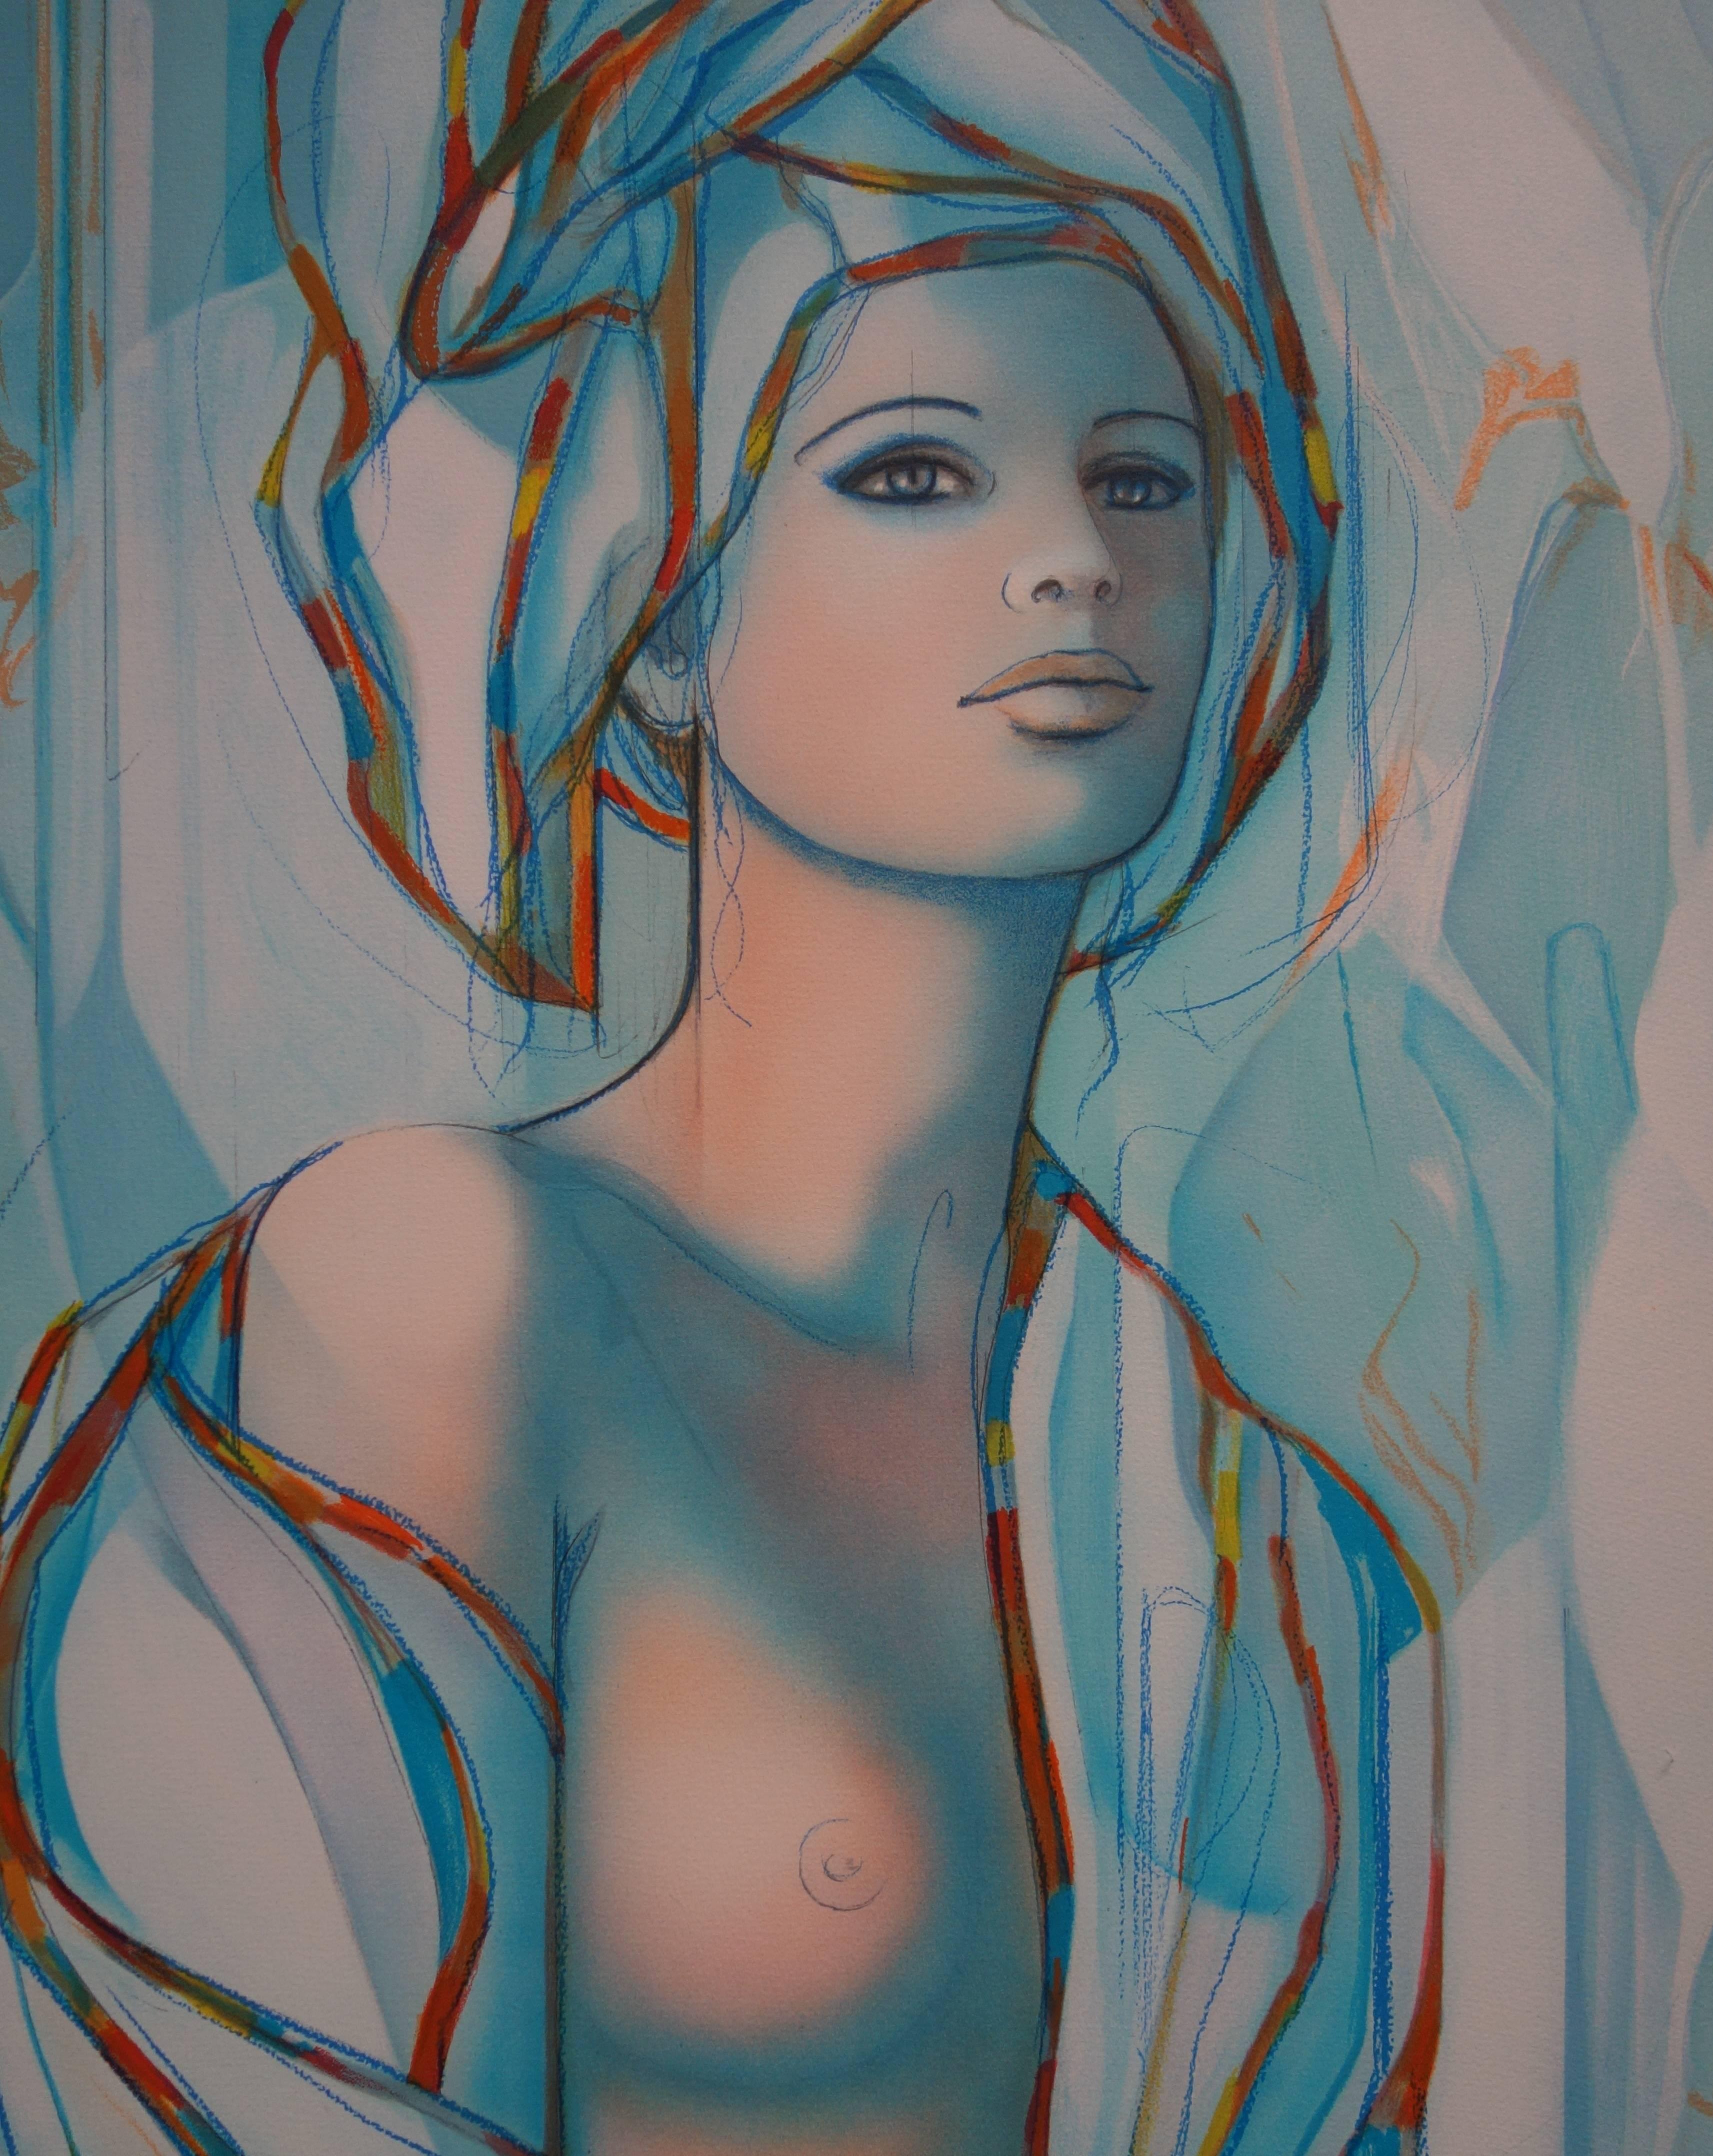 Nude with Blue Turban - Original handsigned lithograph - 199ex - Modern Print by Jean-Baptiste Valadie